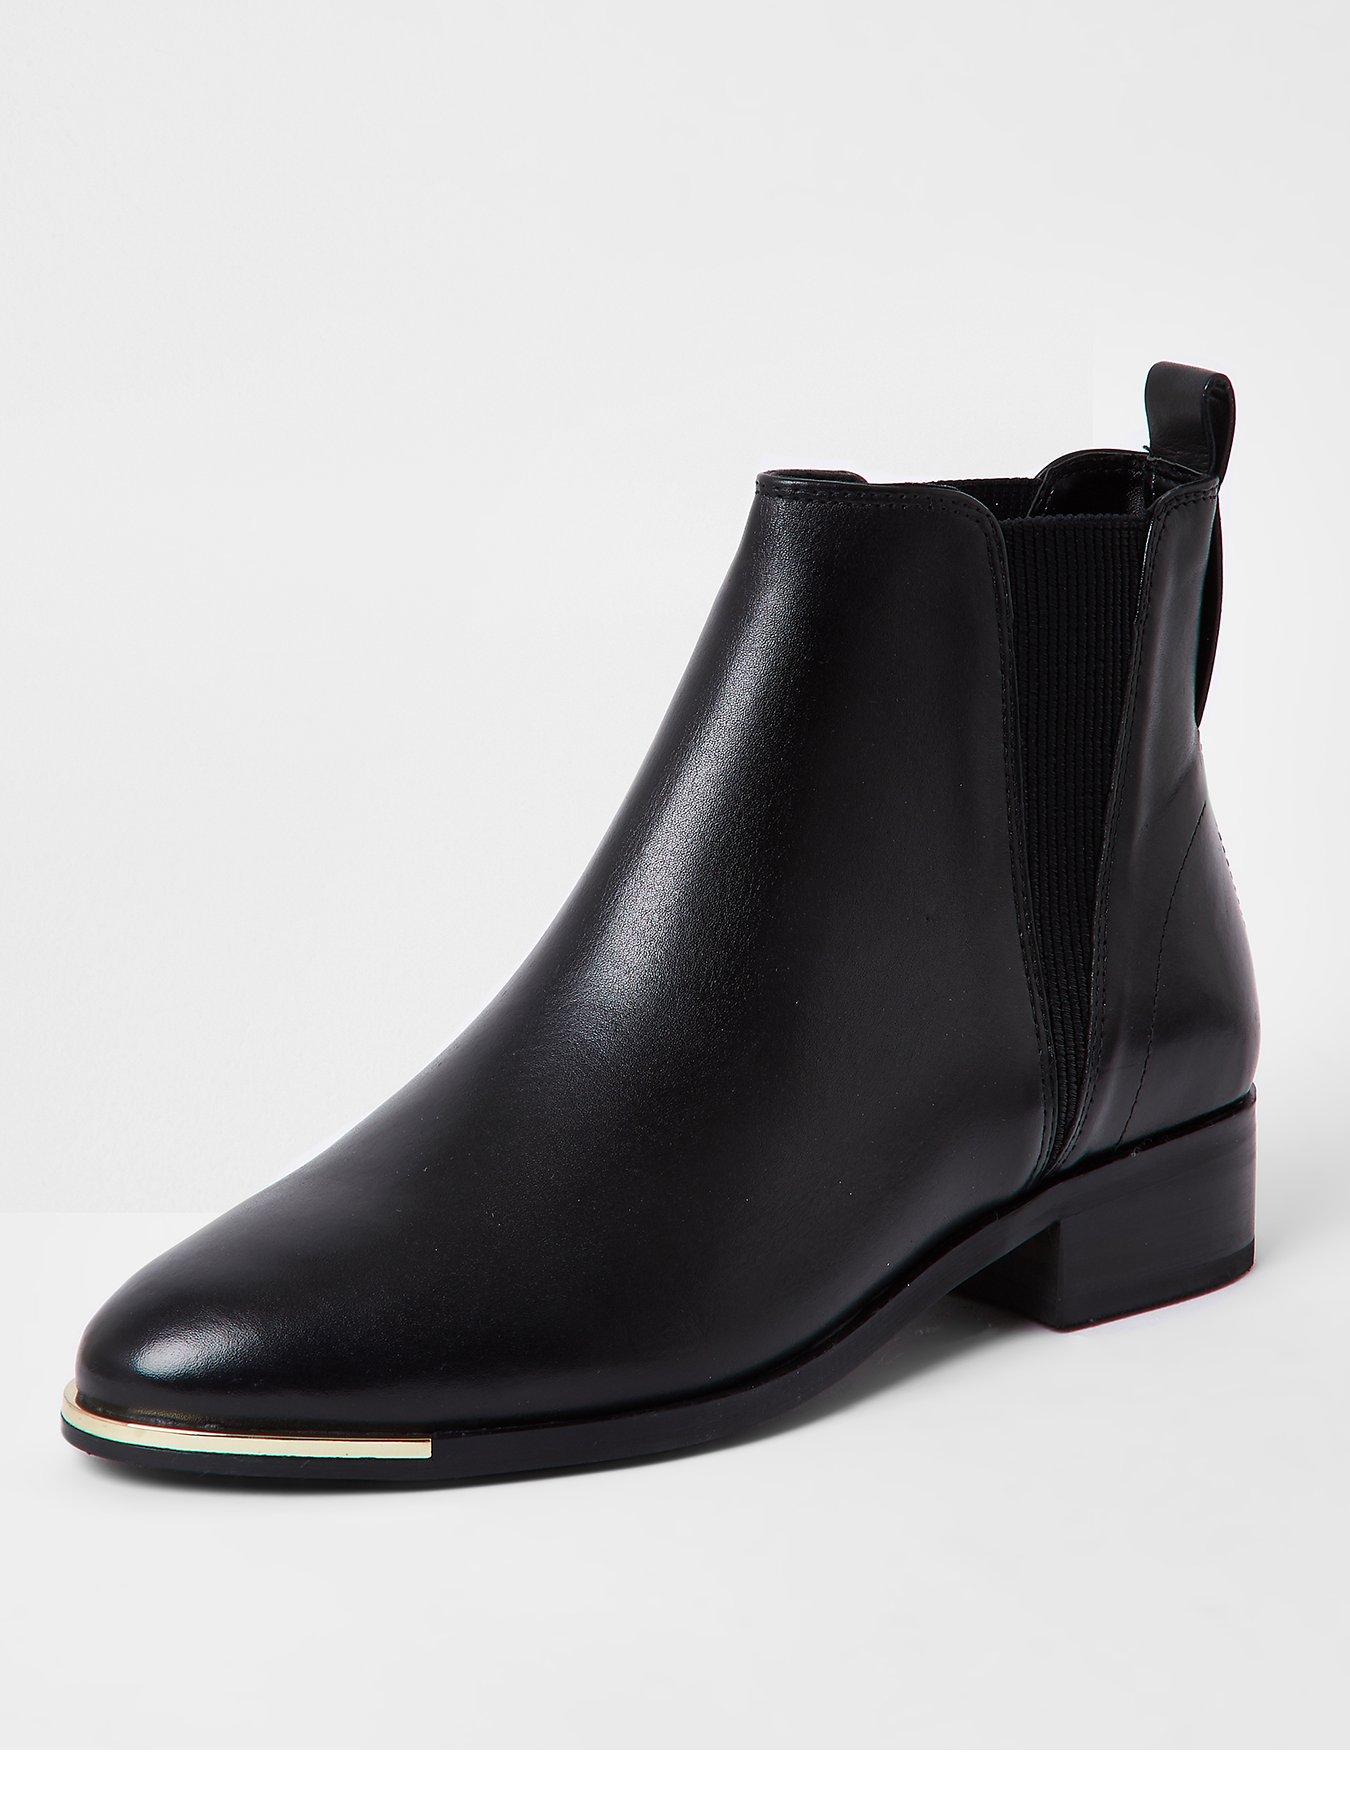 7 | Ankle Boots | River island | Boots 